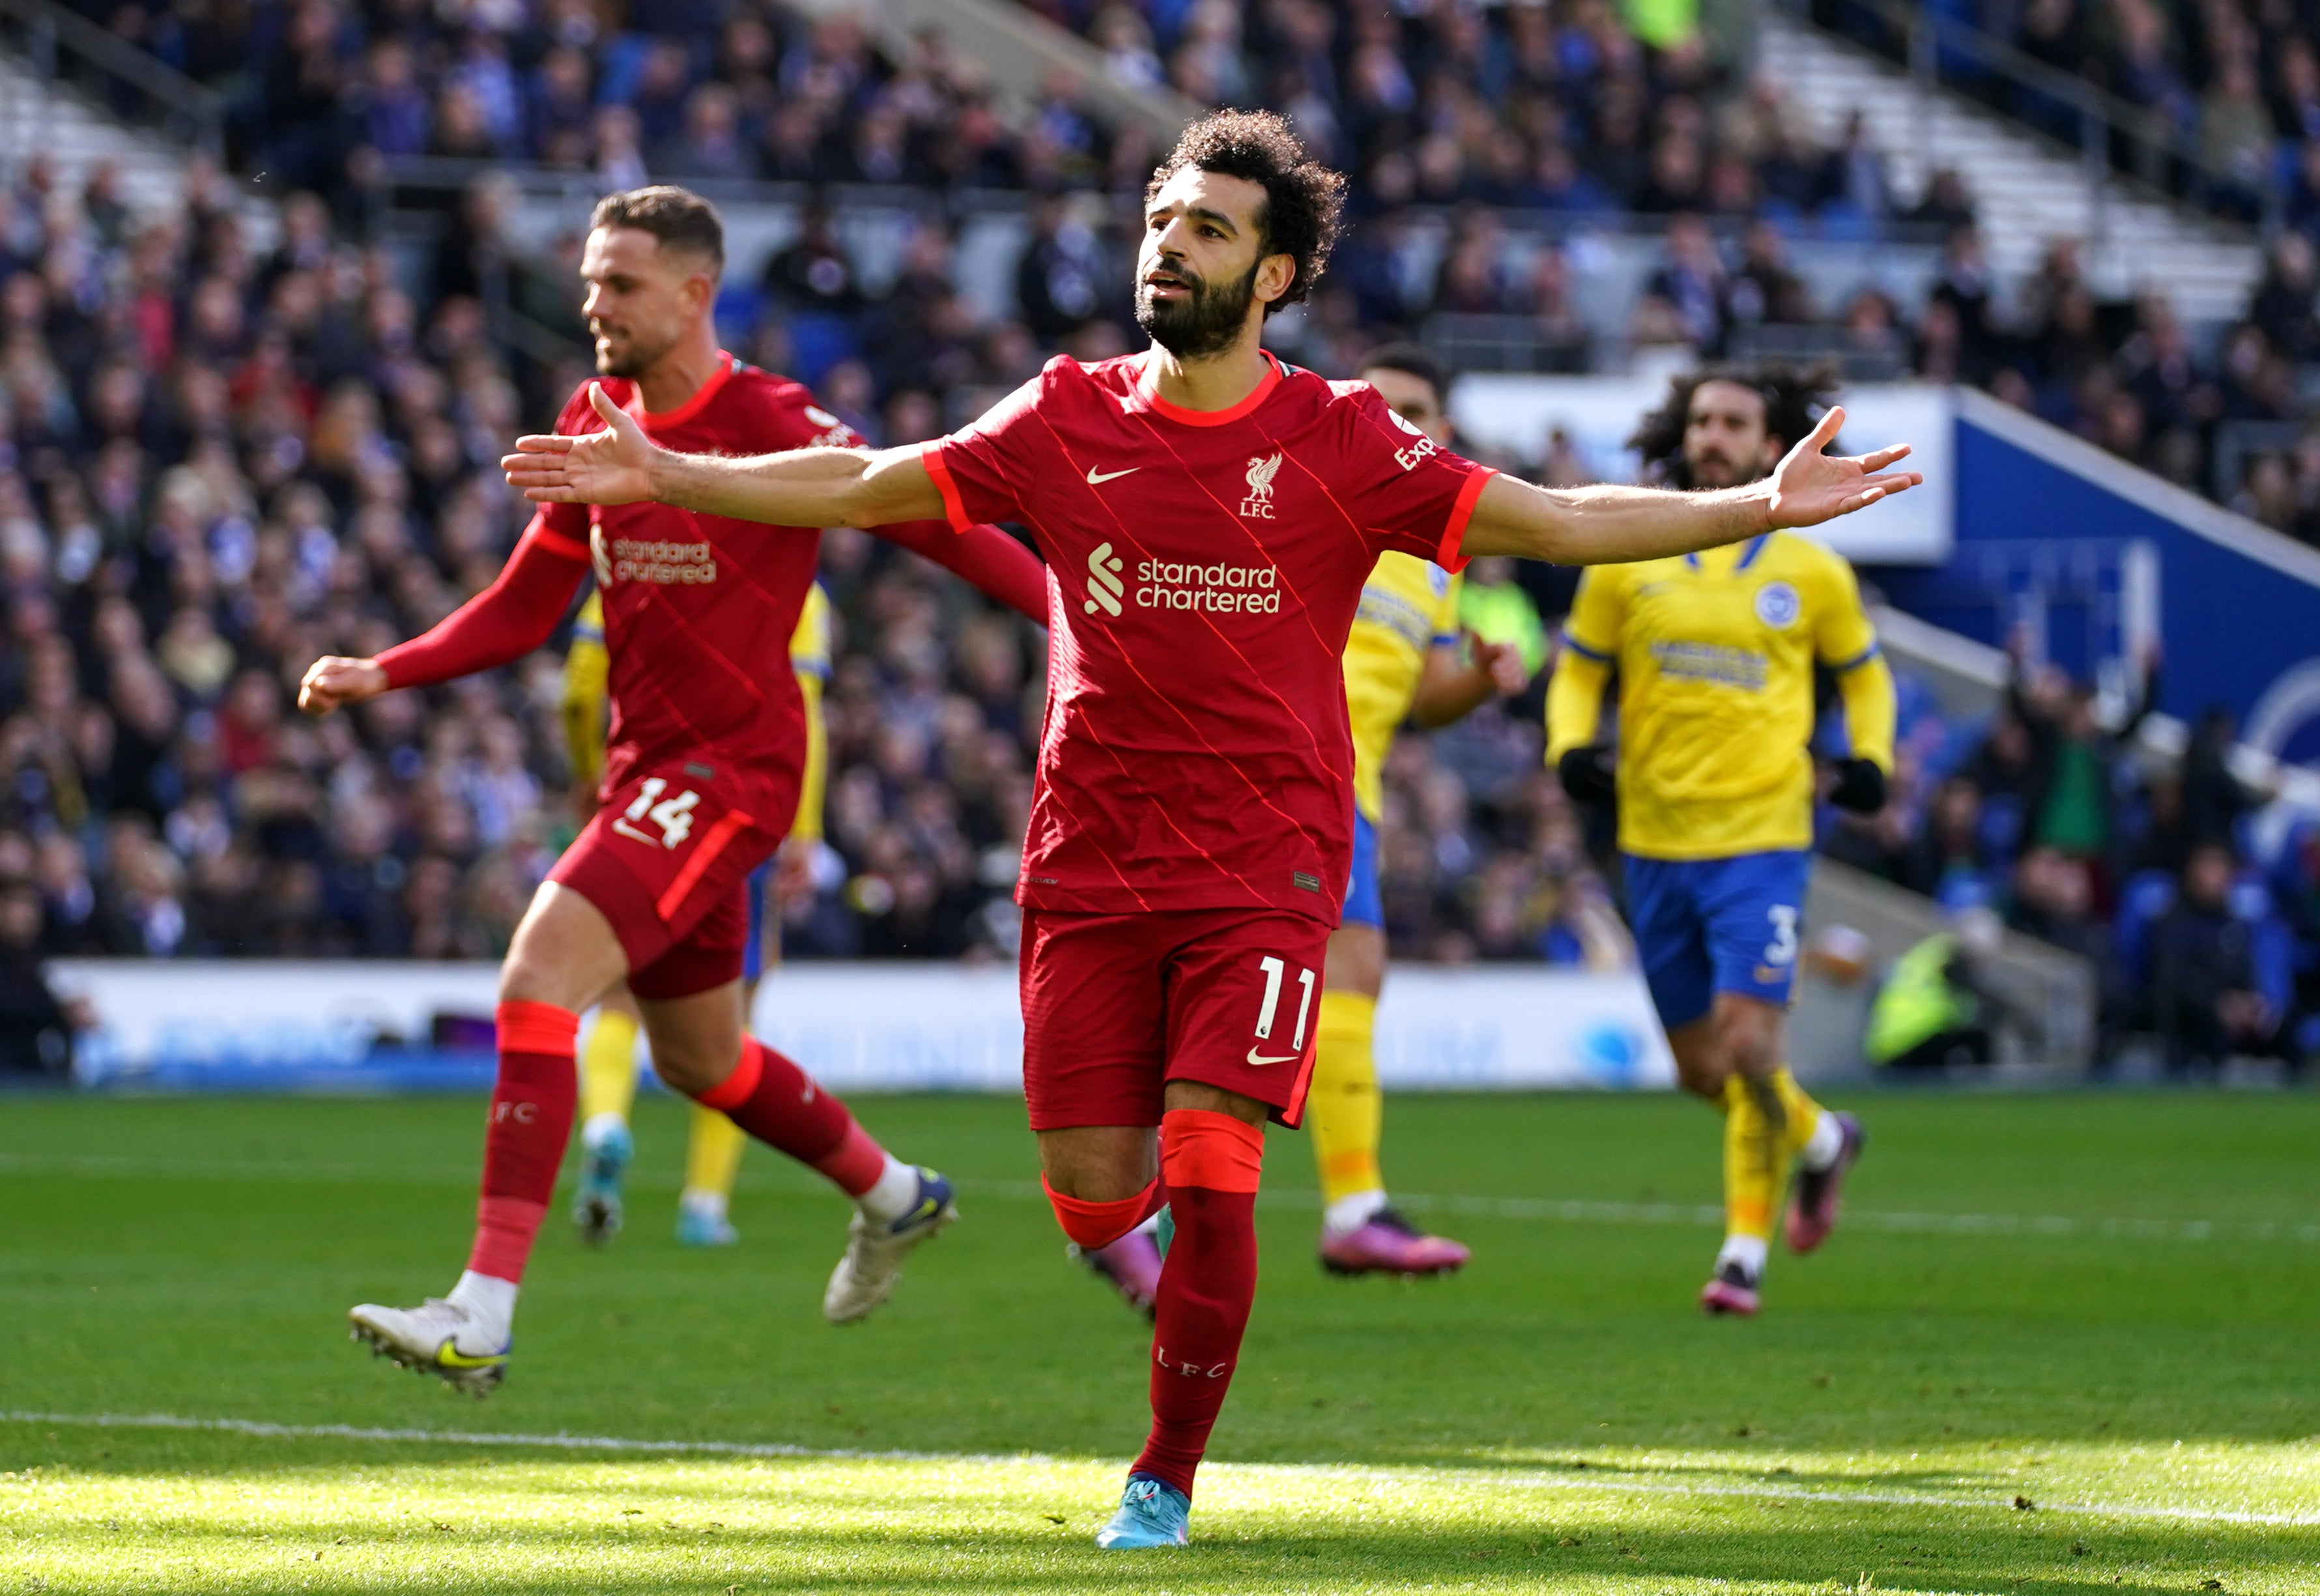 Liverpool manager Jurgen Klopp is confident Mohamed Salah’s contract issue will not affect the dressing room